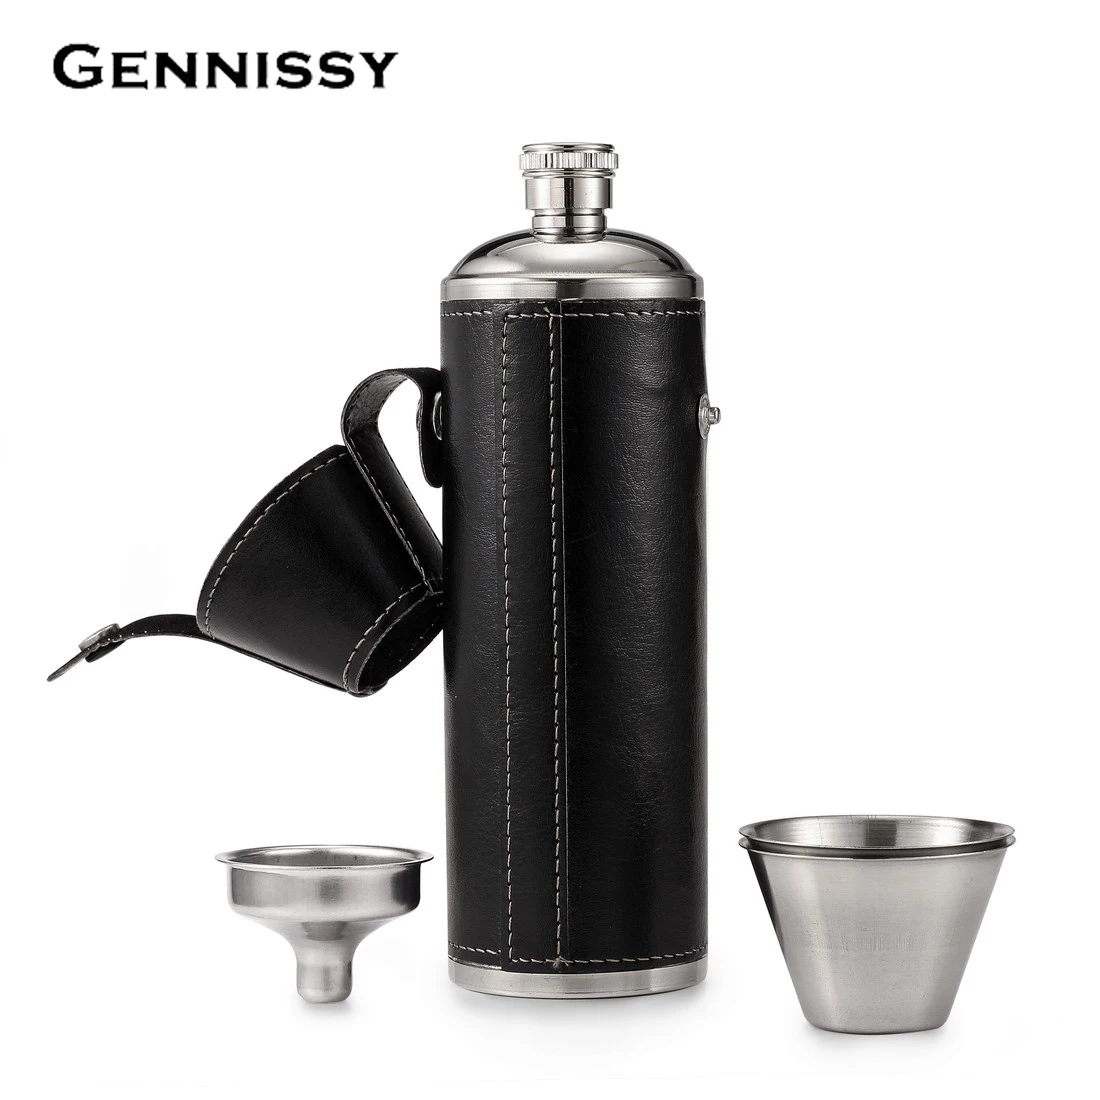 Stainless Steel with Leather Wrapped Cover and 100% Leak Proof GENNISSY Pocket Hip Flask 8 Oz with Funnel 